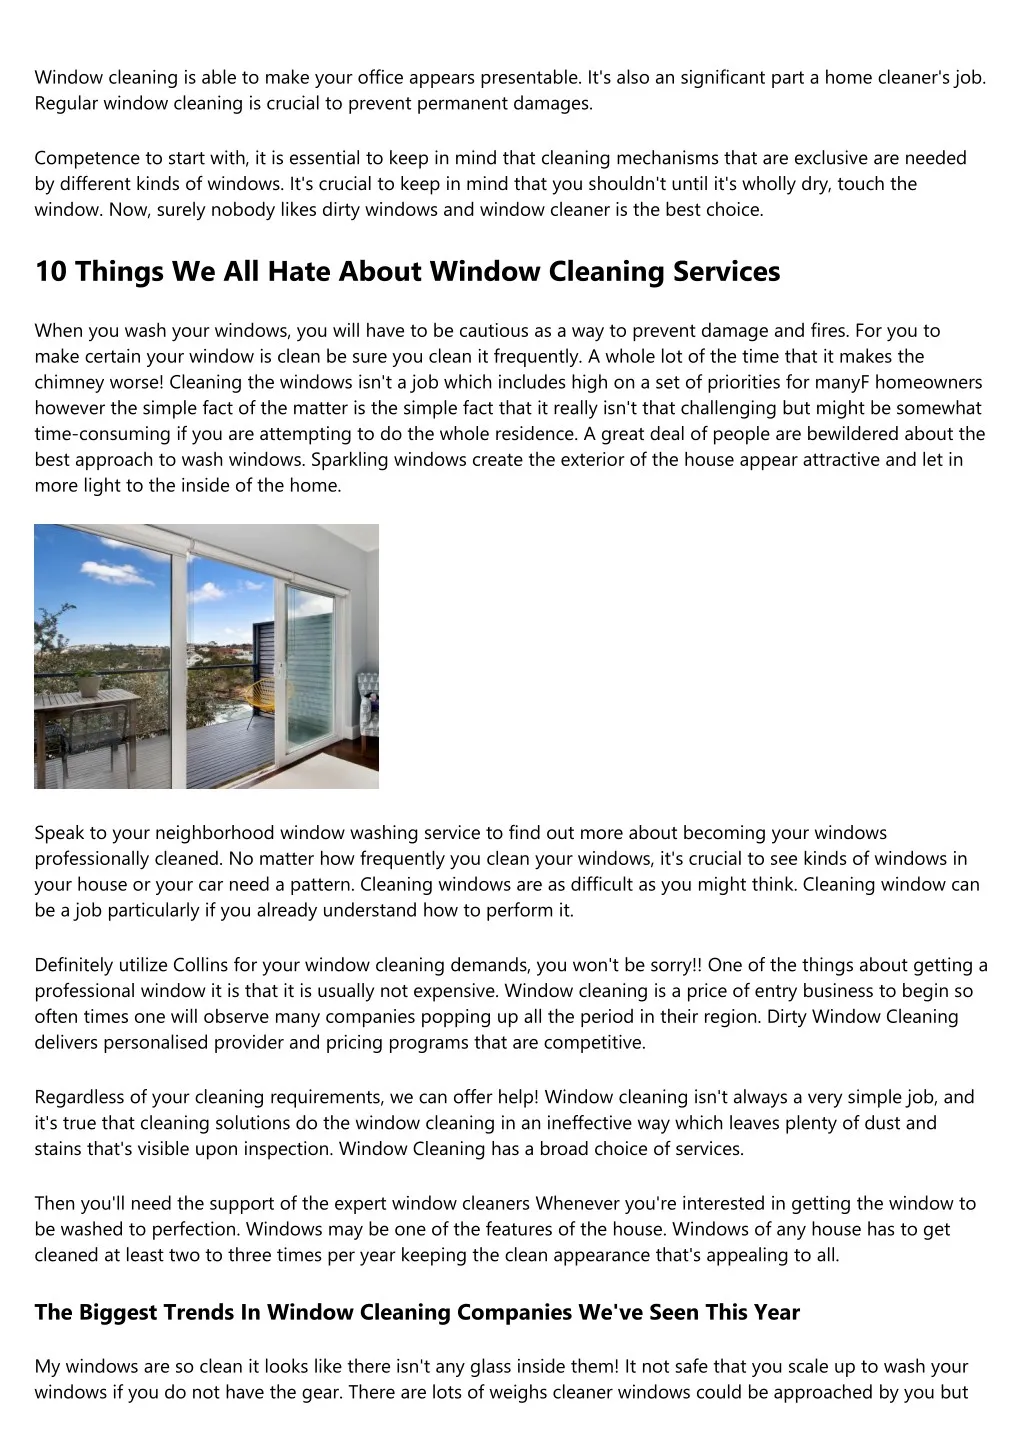 5 Types of Window Cleaning Services You Need Right Now